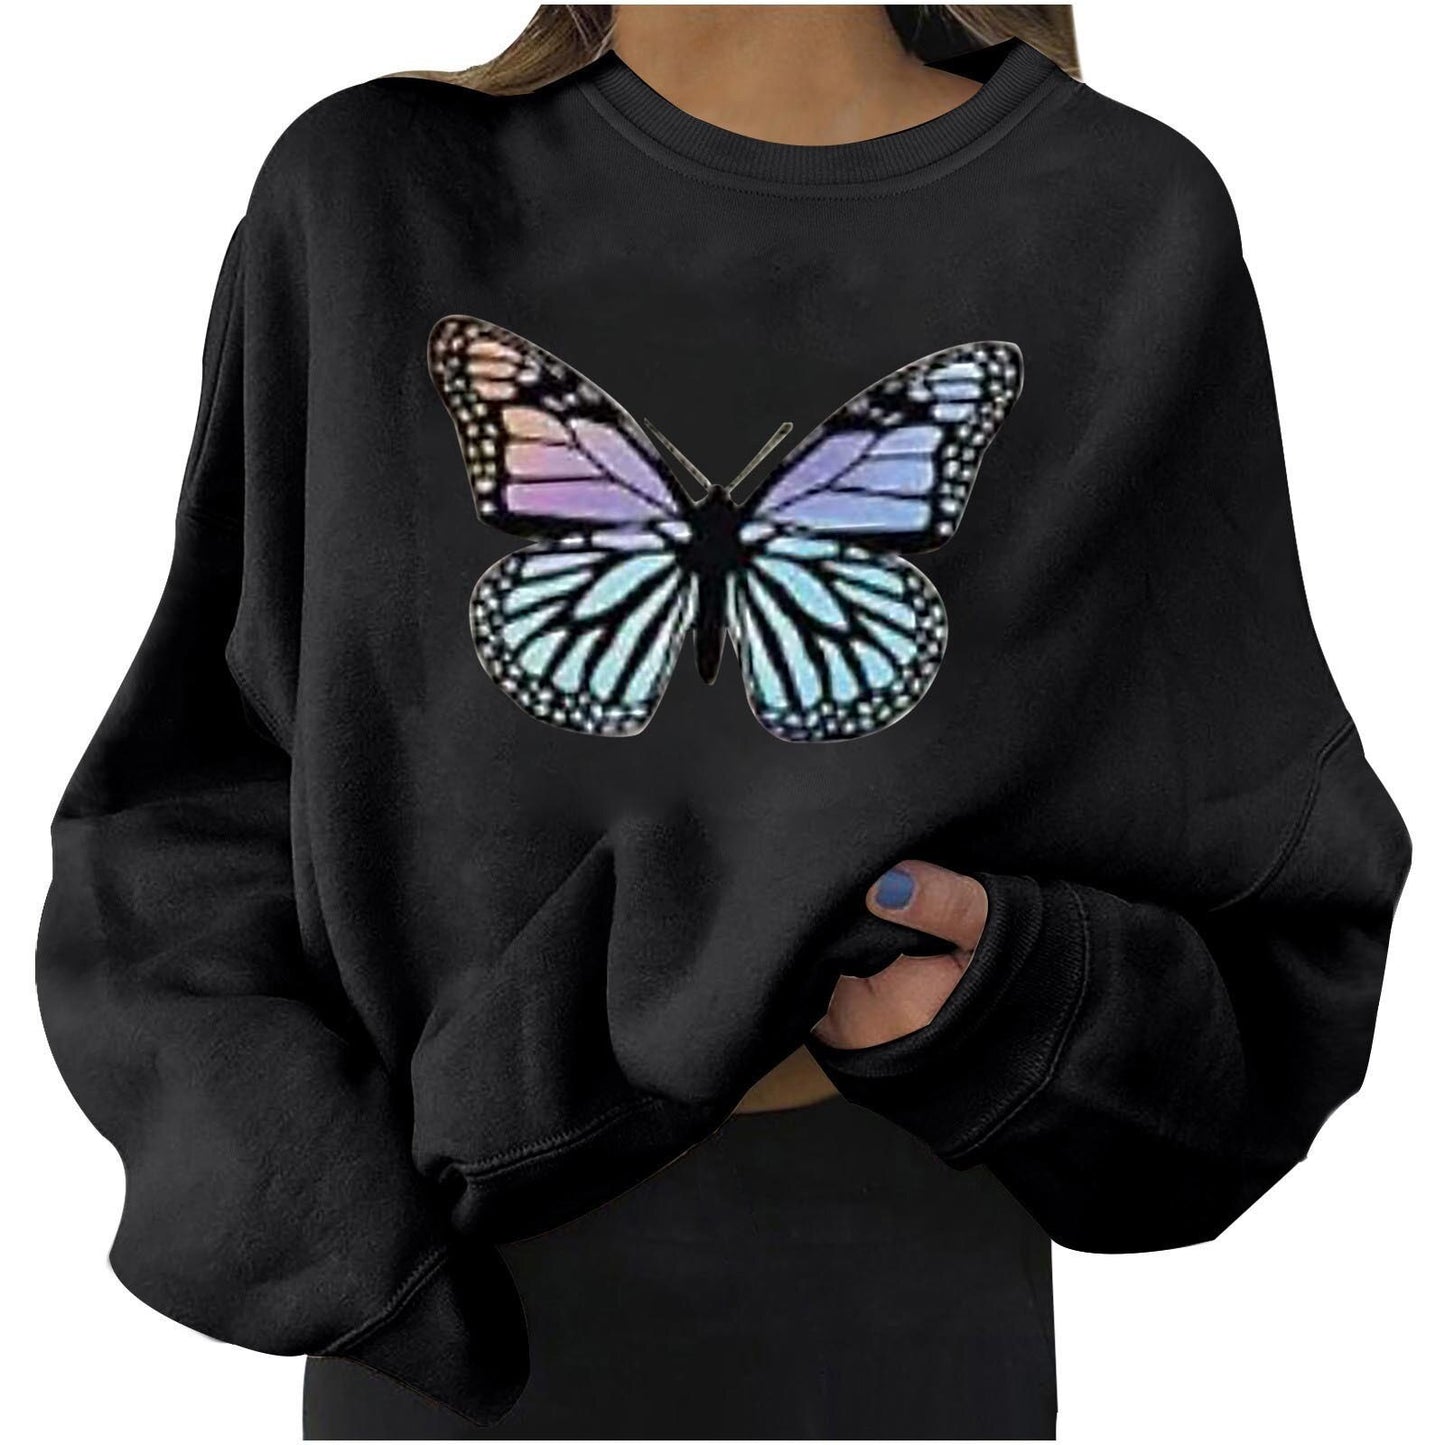 Butterfly Print Hoodie Round Neck Long Sleeve -Women’s